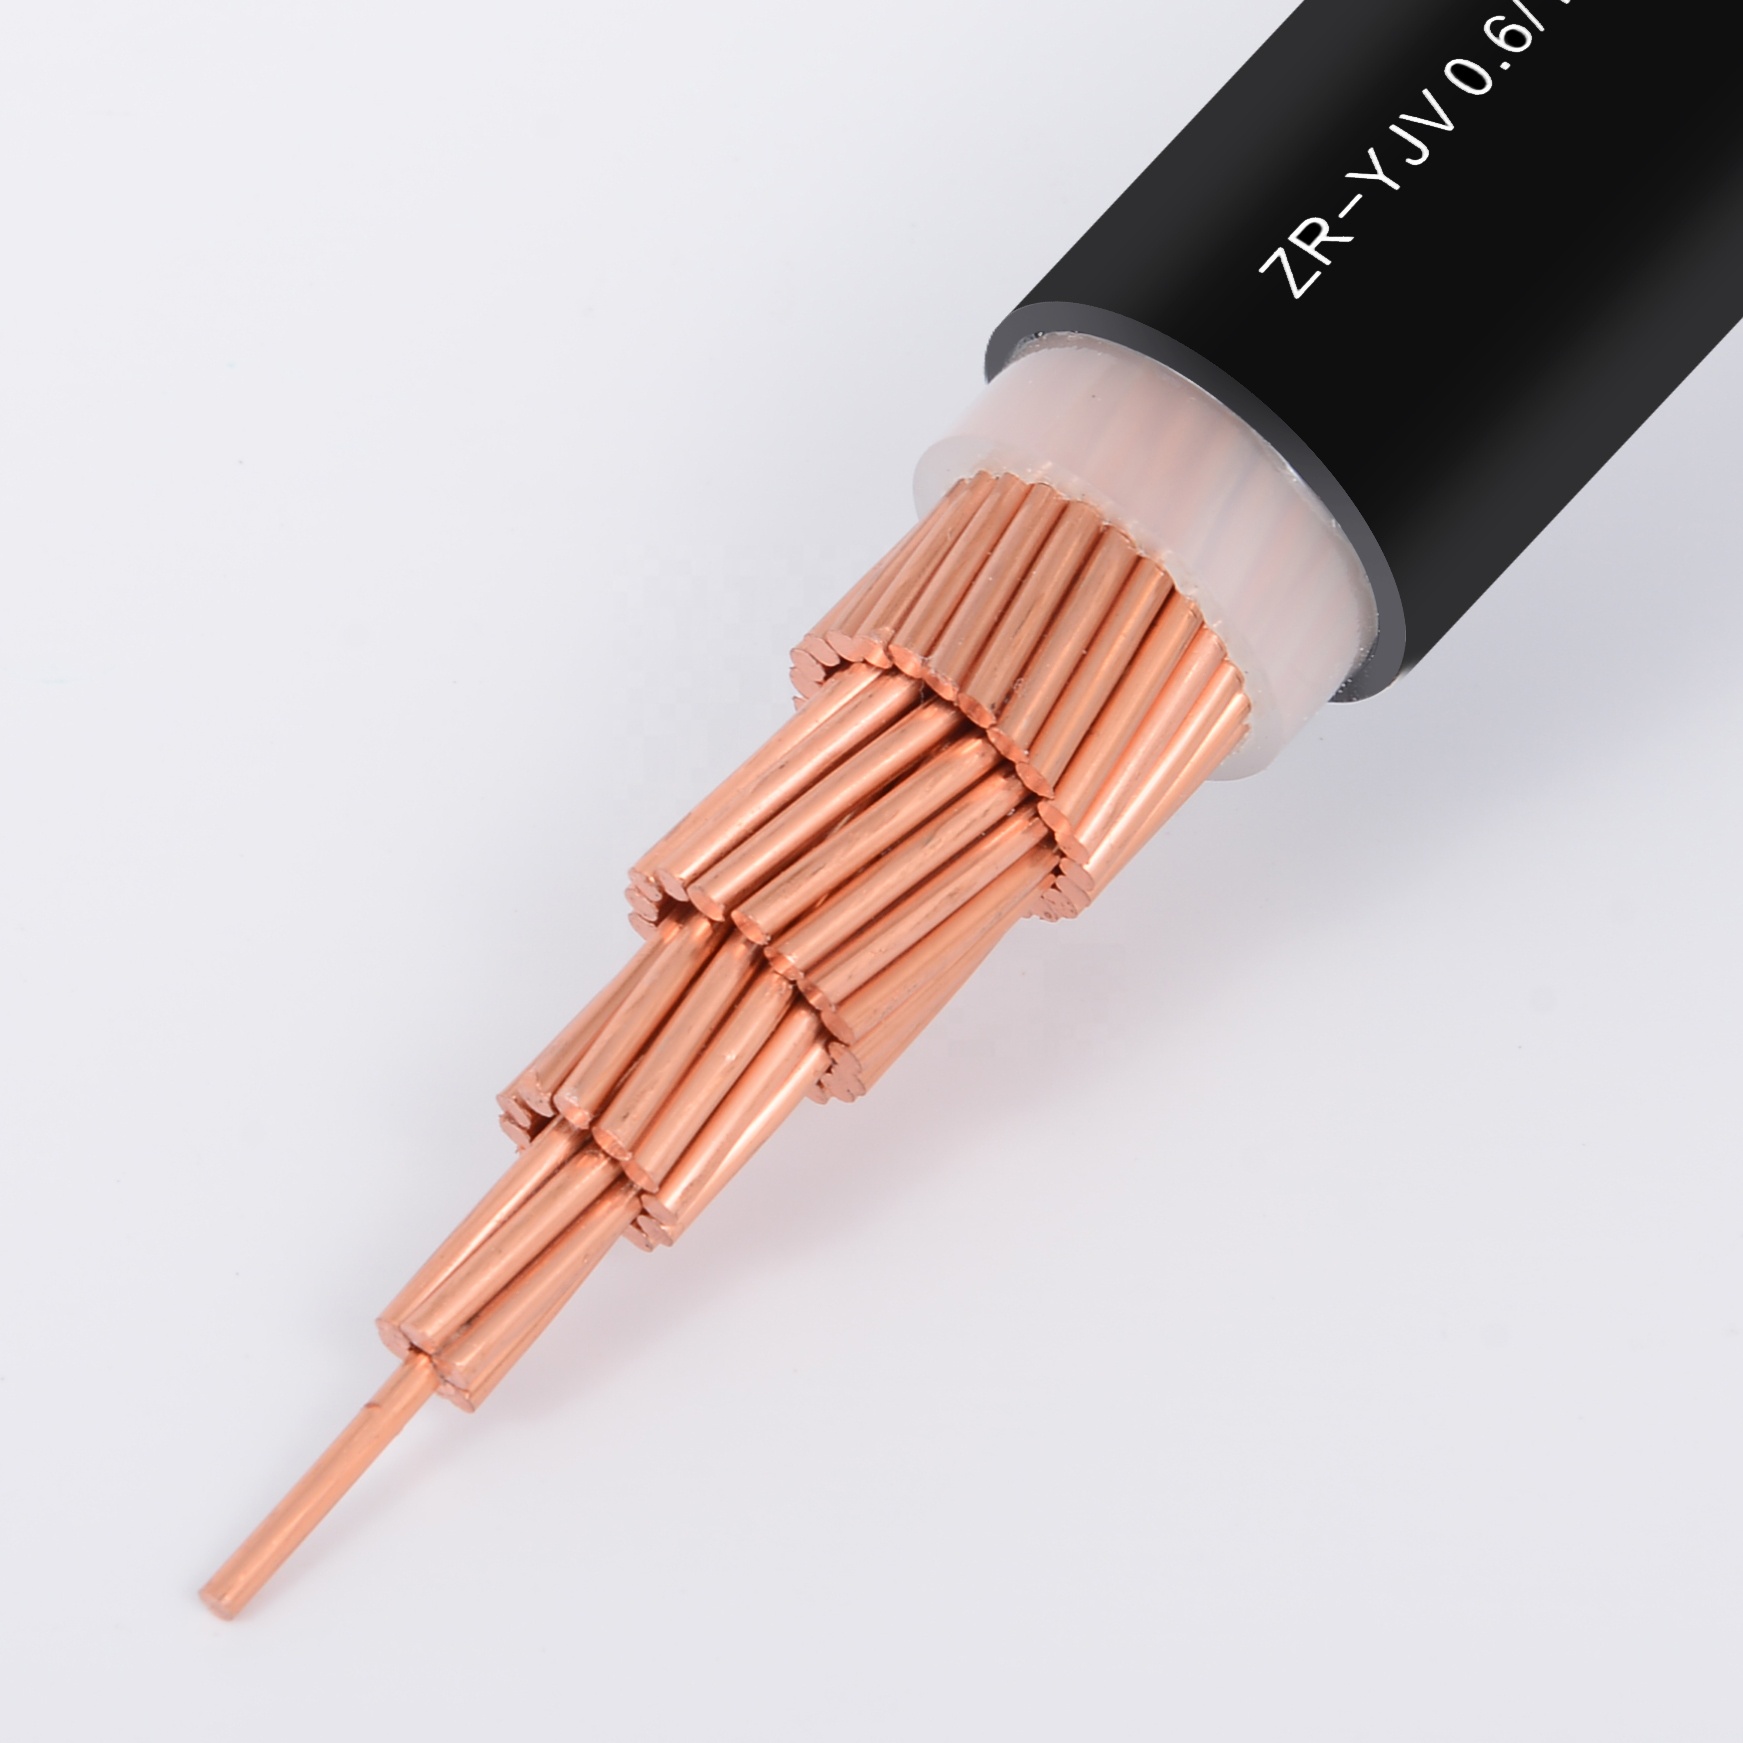 flexible power cable